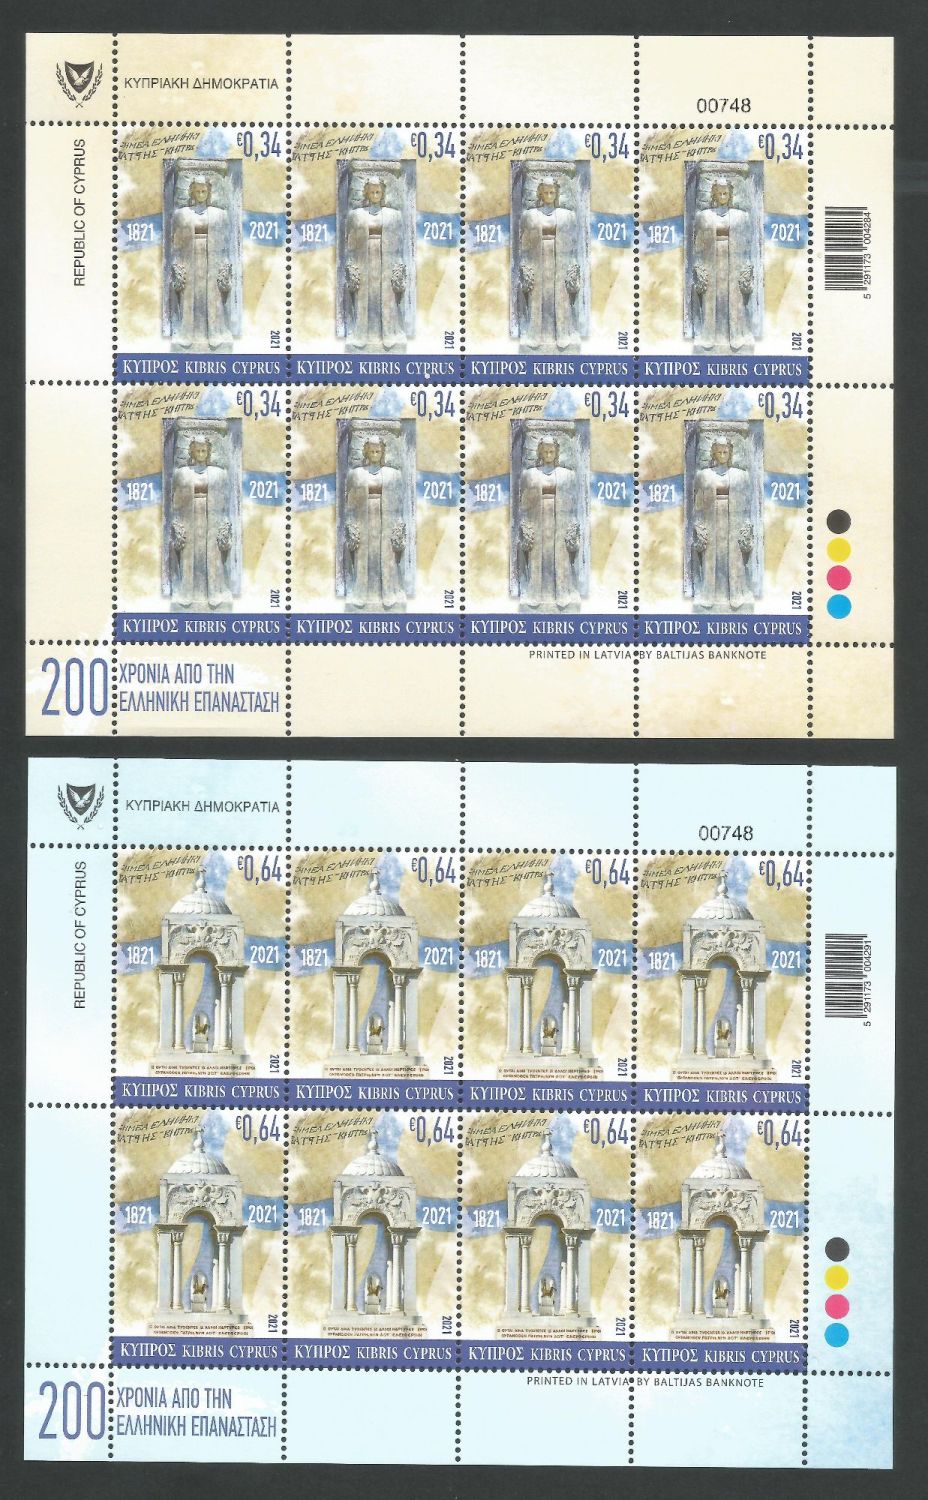 Cyprus Stamps SG 2021 (c) 200 Years since the Greek Revolution - Full Sheet